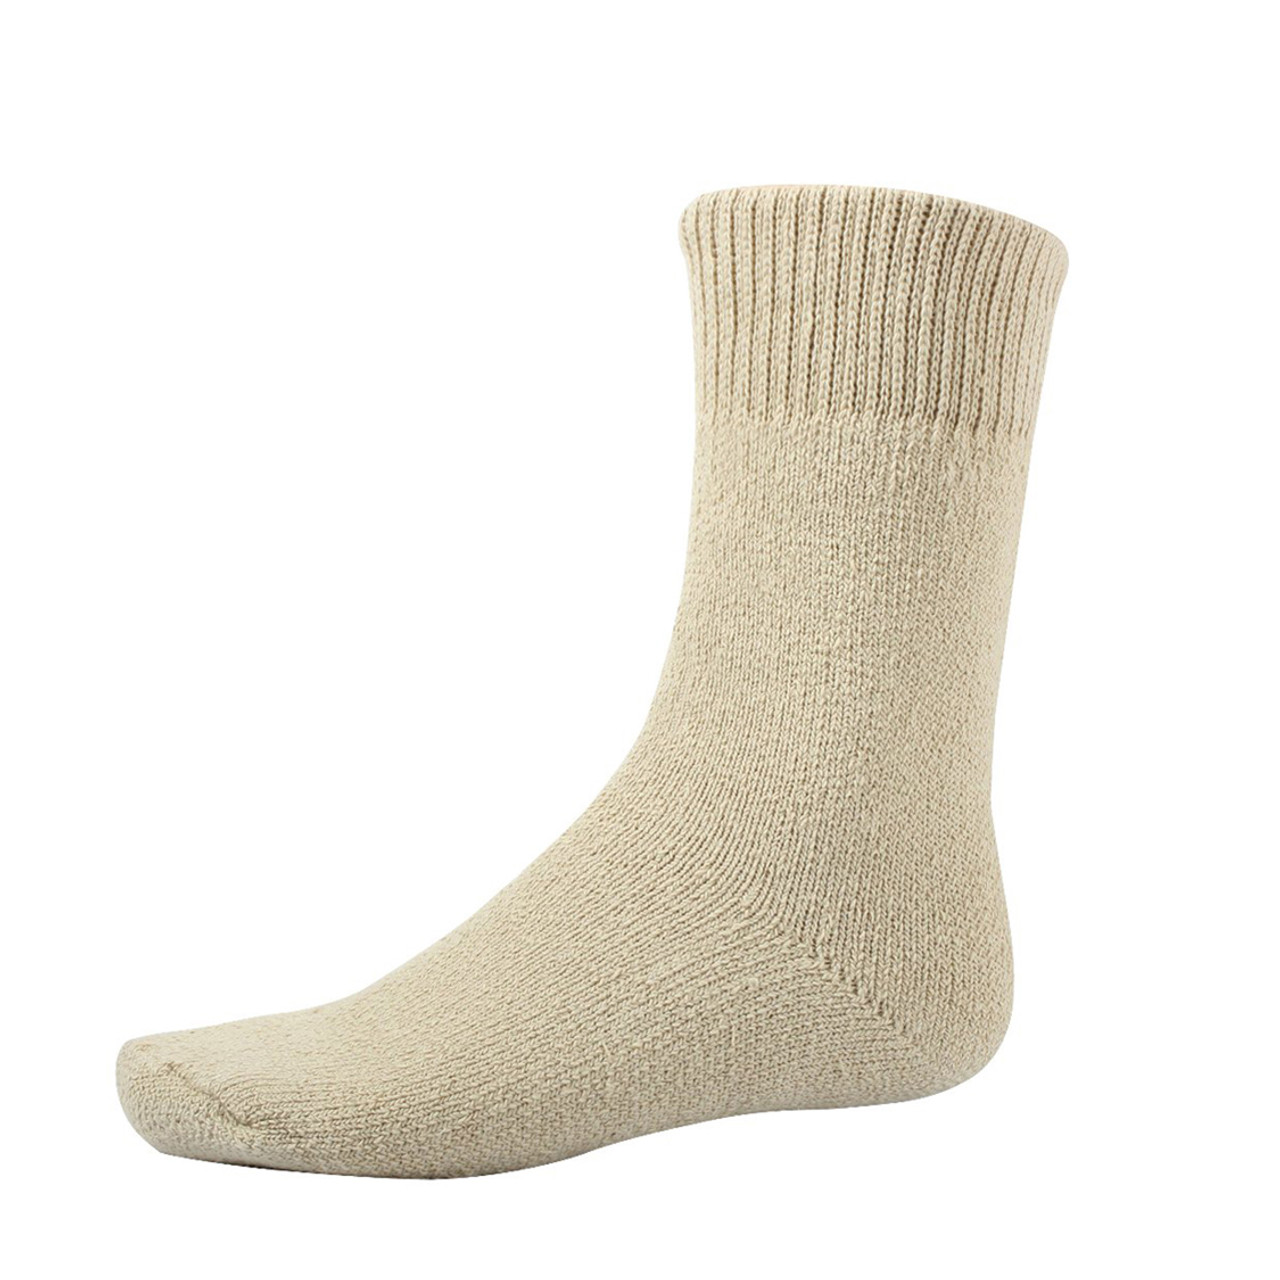 Shop Outdoor Khaki Thermal Boot Socks - Fatigues Army Navy Gear